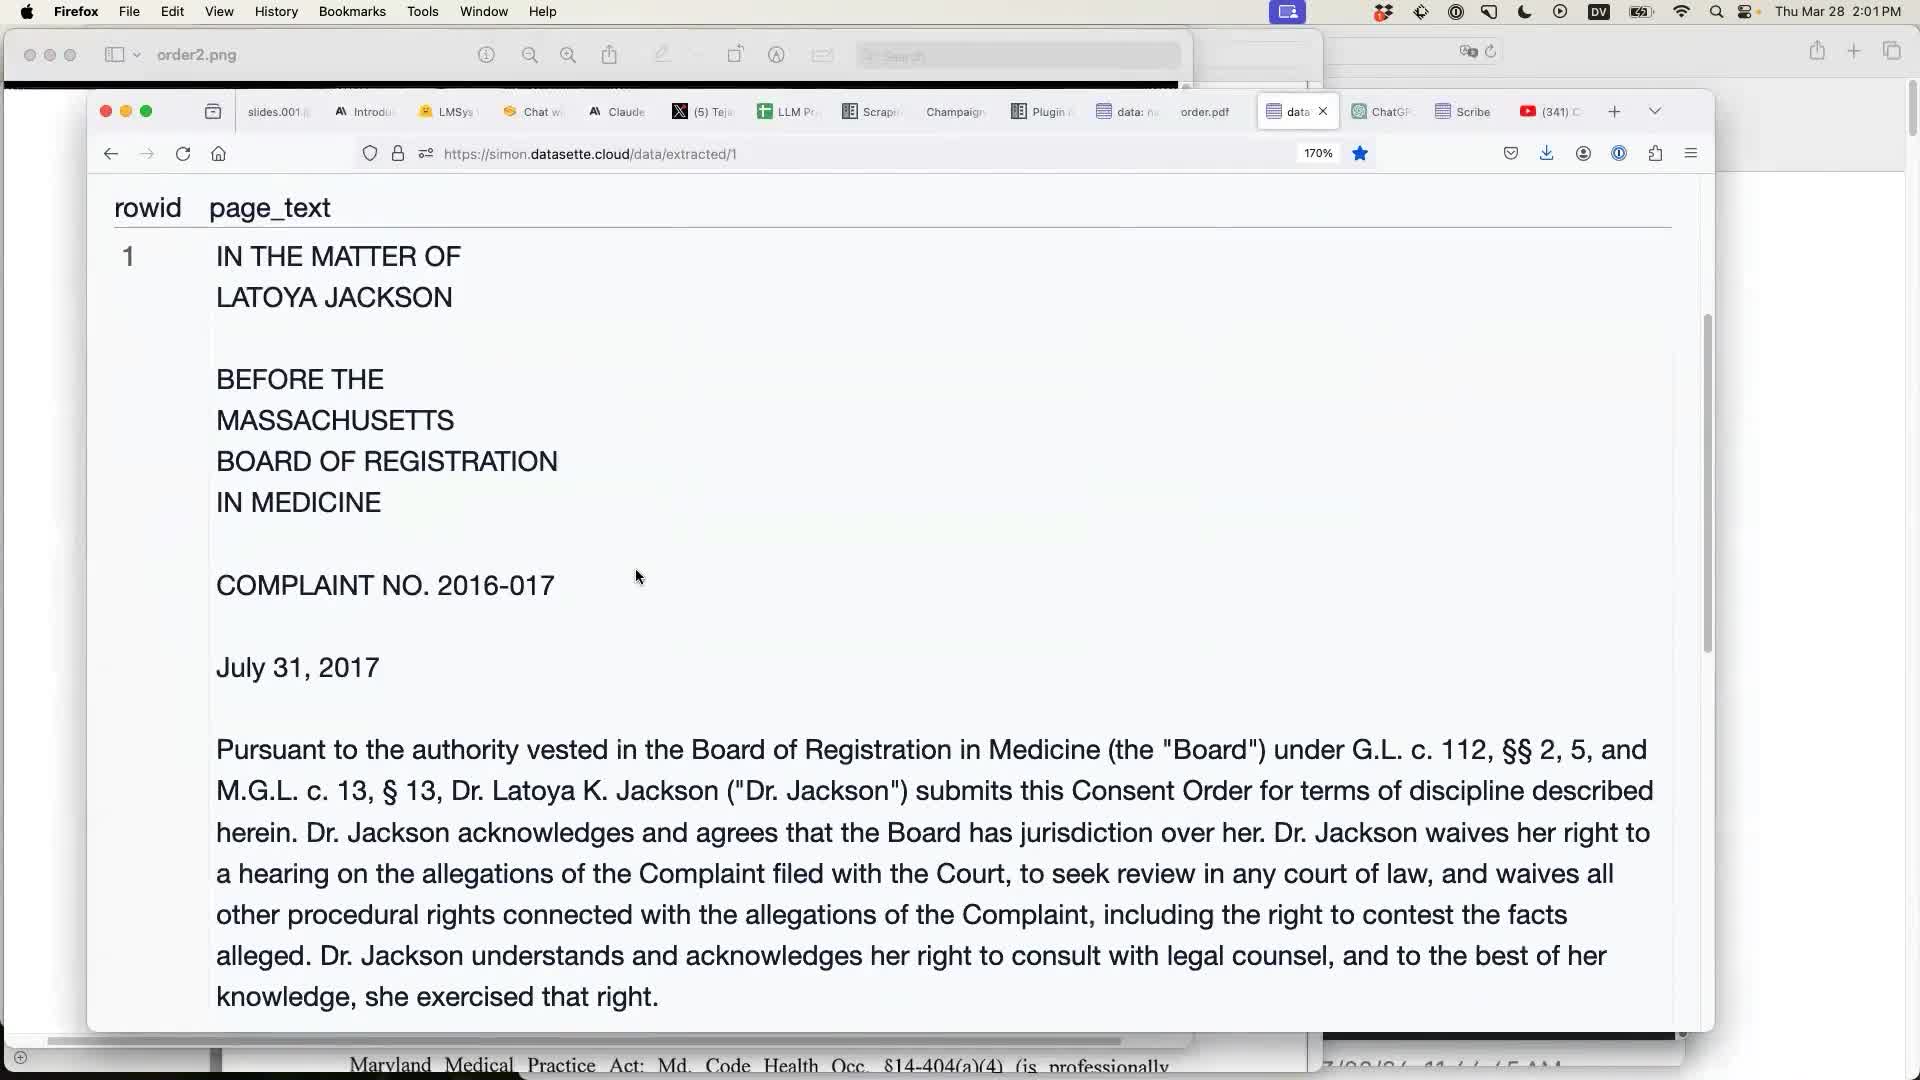 Screenshot of a Datasetet table containing page_text. IN THE MATTER OF LATOYA JACKSON BEFORE THE MASSACHUSETTS BOARD OF REGISTRATION IN MEDICINE COMPLAINT NO. 2016-017 July 31, 2017 Pursuant to the authority vested in the Board of Registration in Medicine (the "Board") under G.L